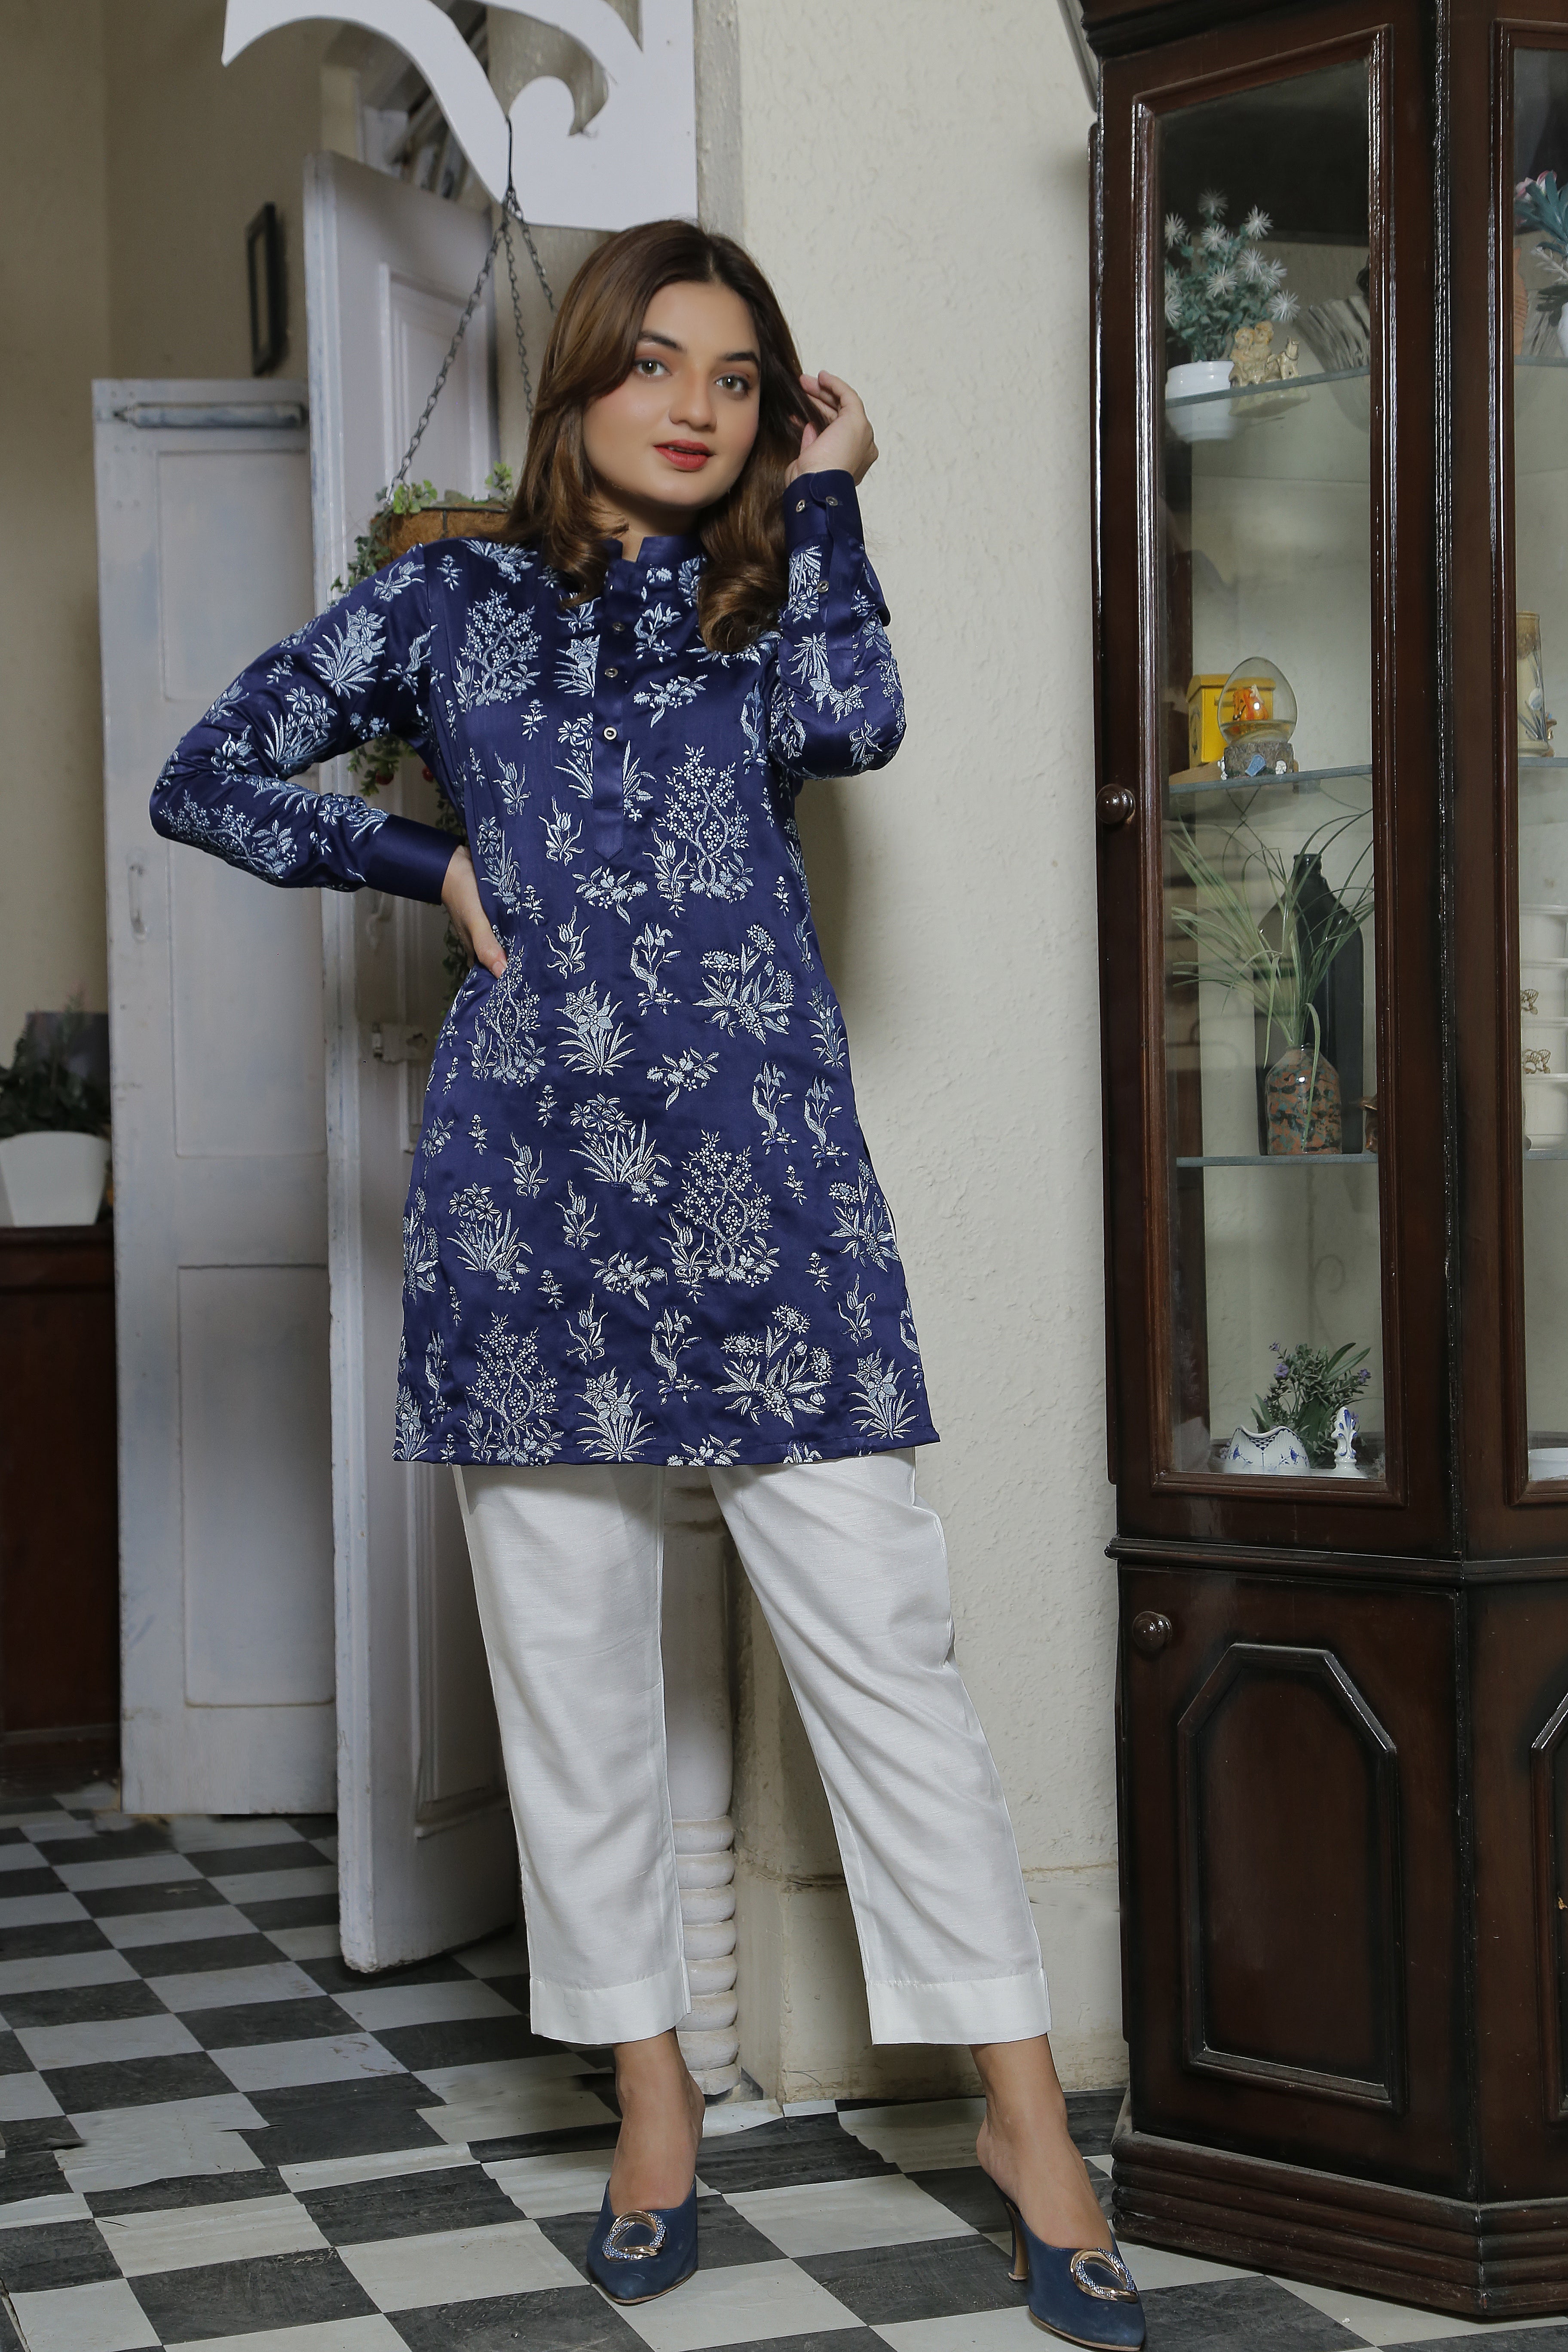 Bluish Color With Floral Embroidered Kurta With White Trouser For Couples